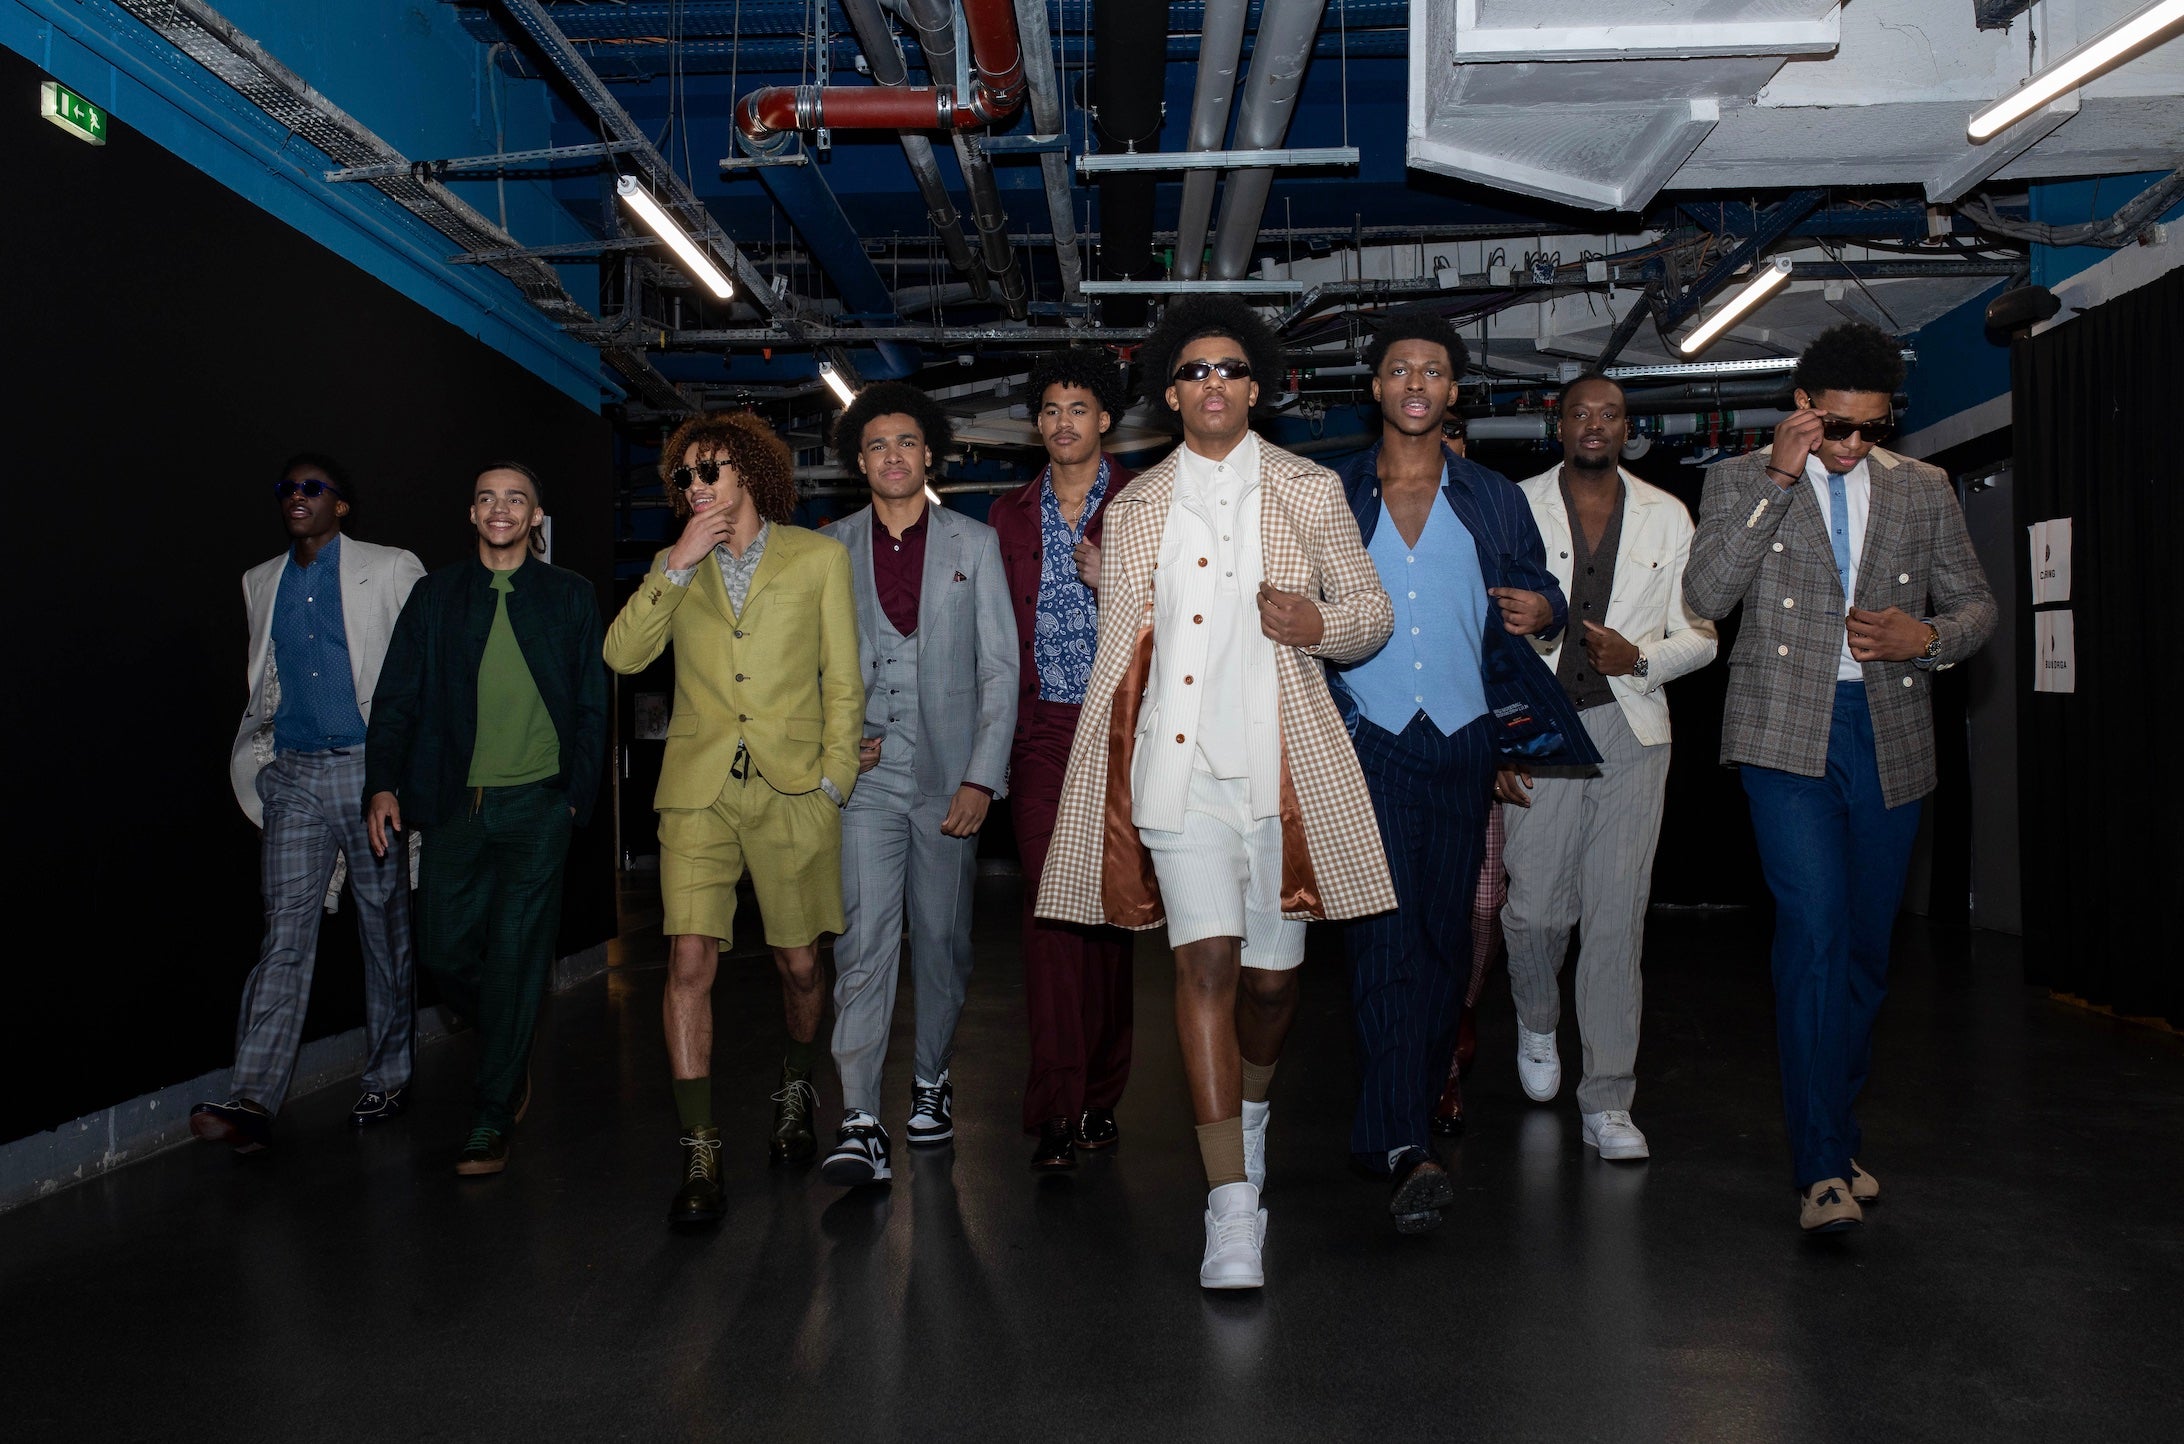 KEP Presented The Fashion Game at the Paris Basketball Halftime Show